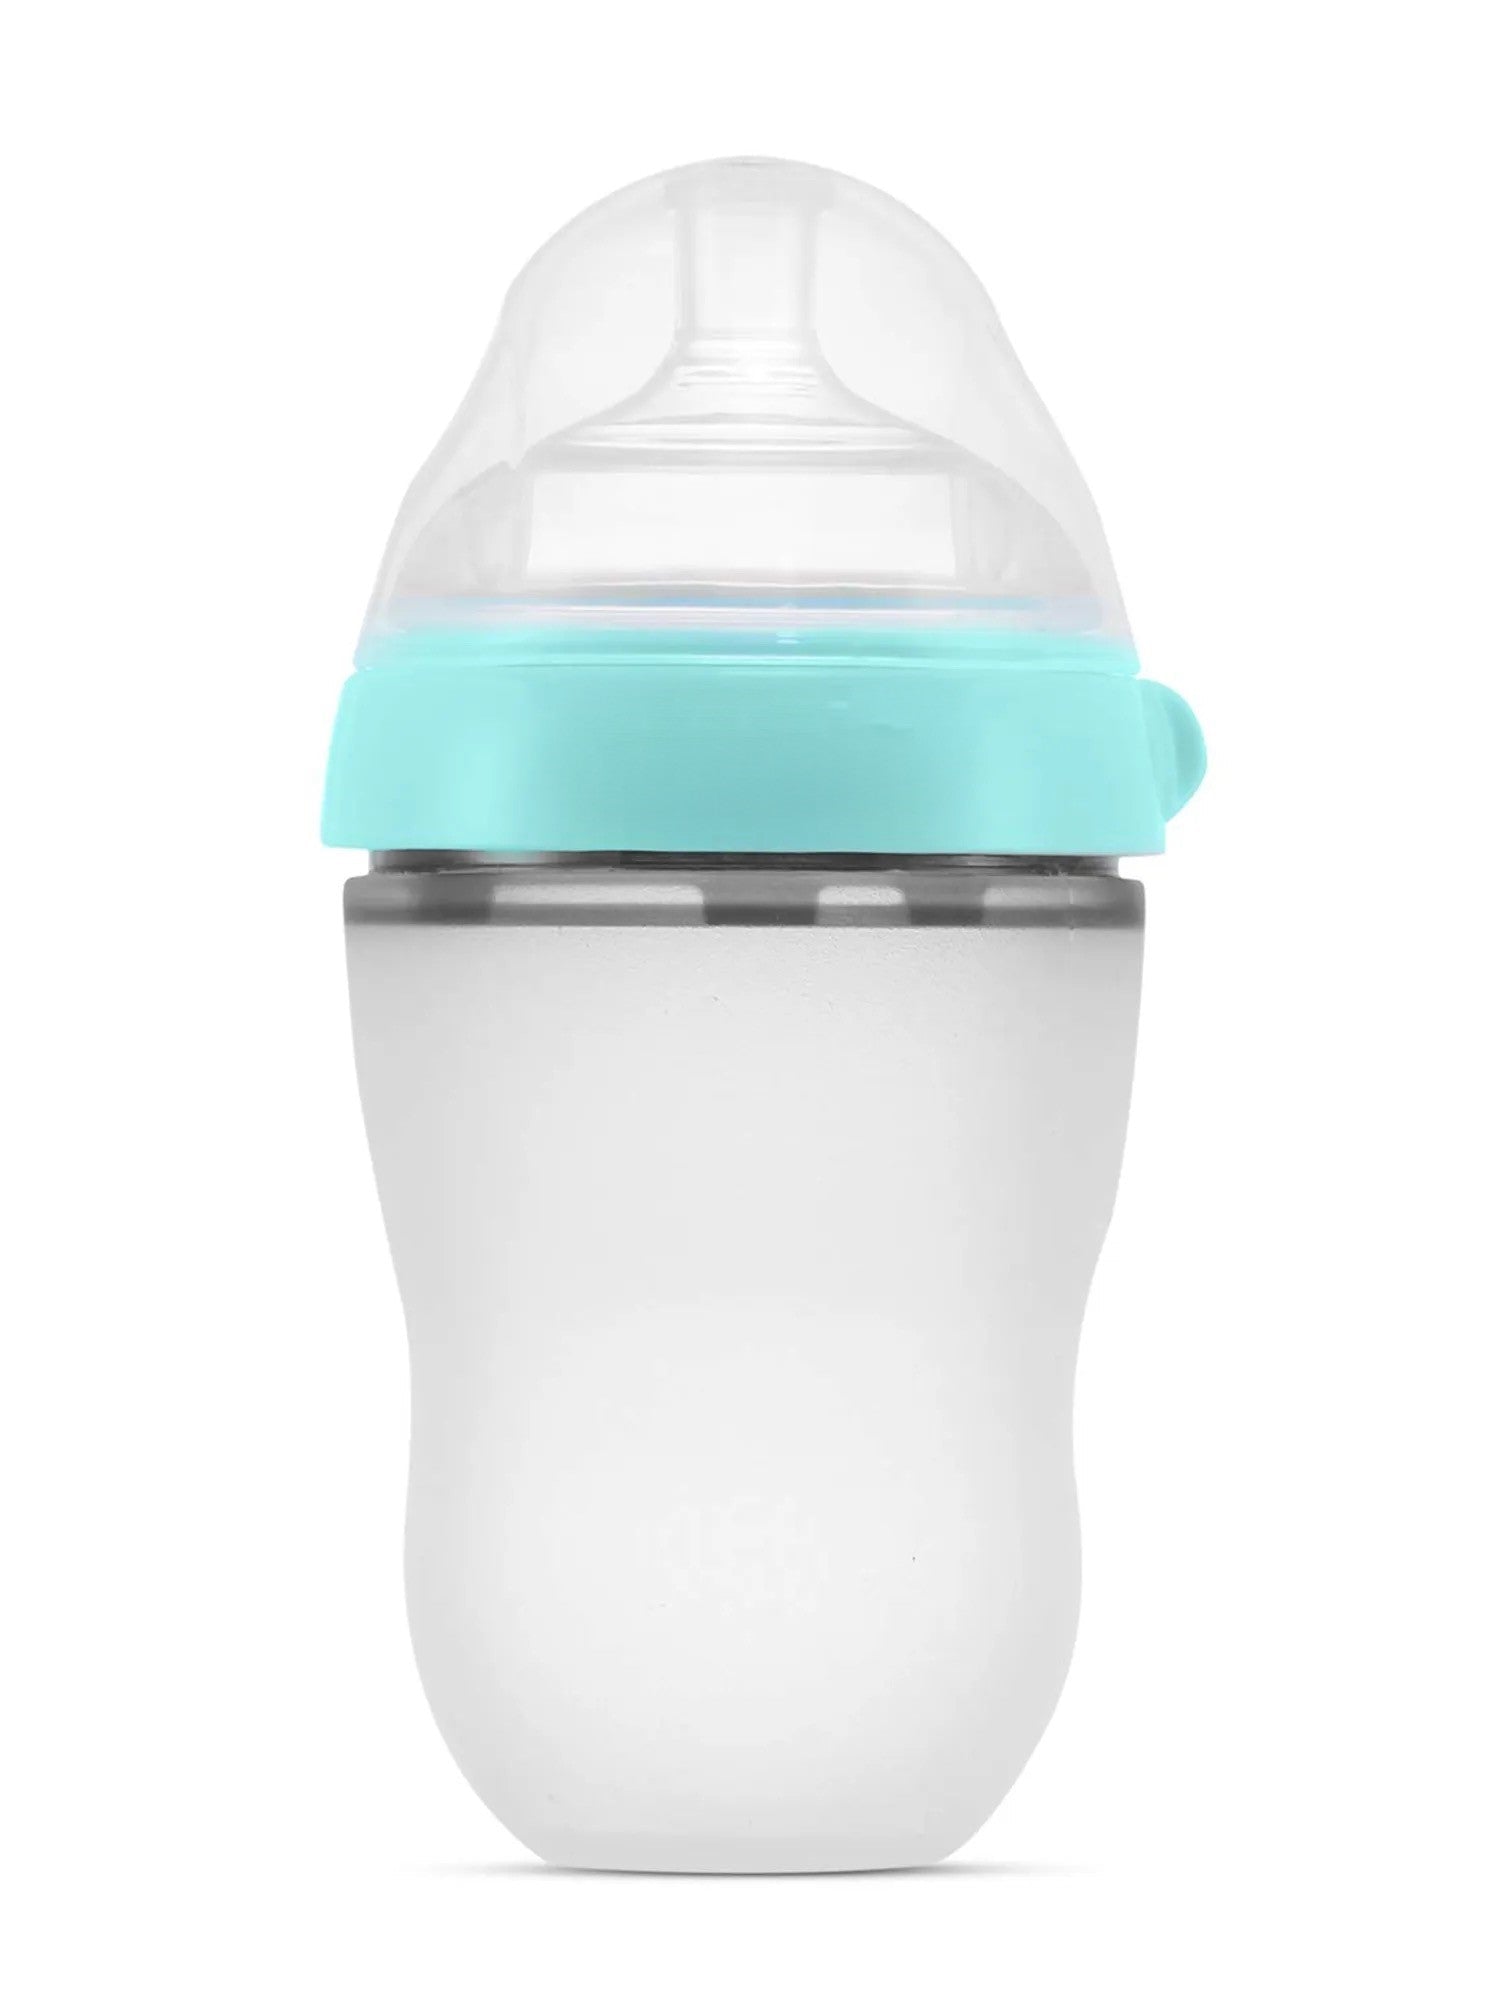 Baby Silicone Products - Chai Silicone Baby Bottles